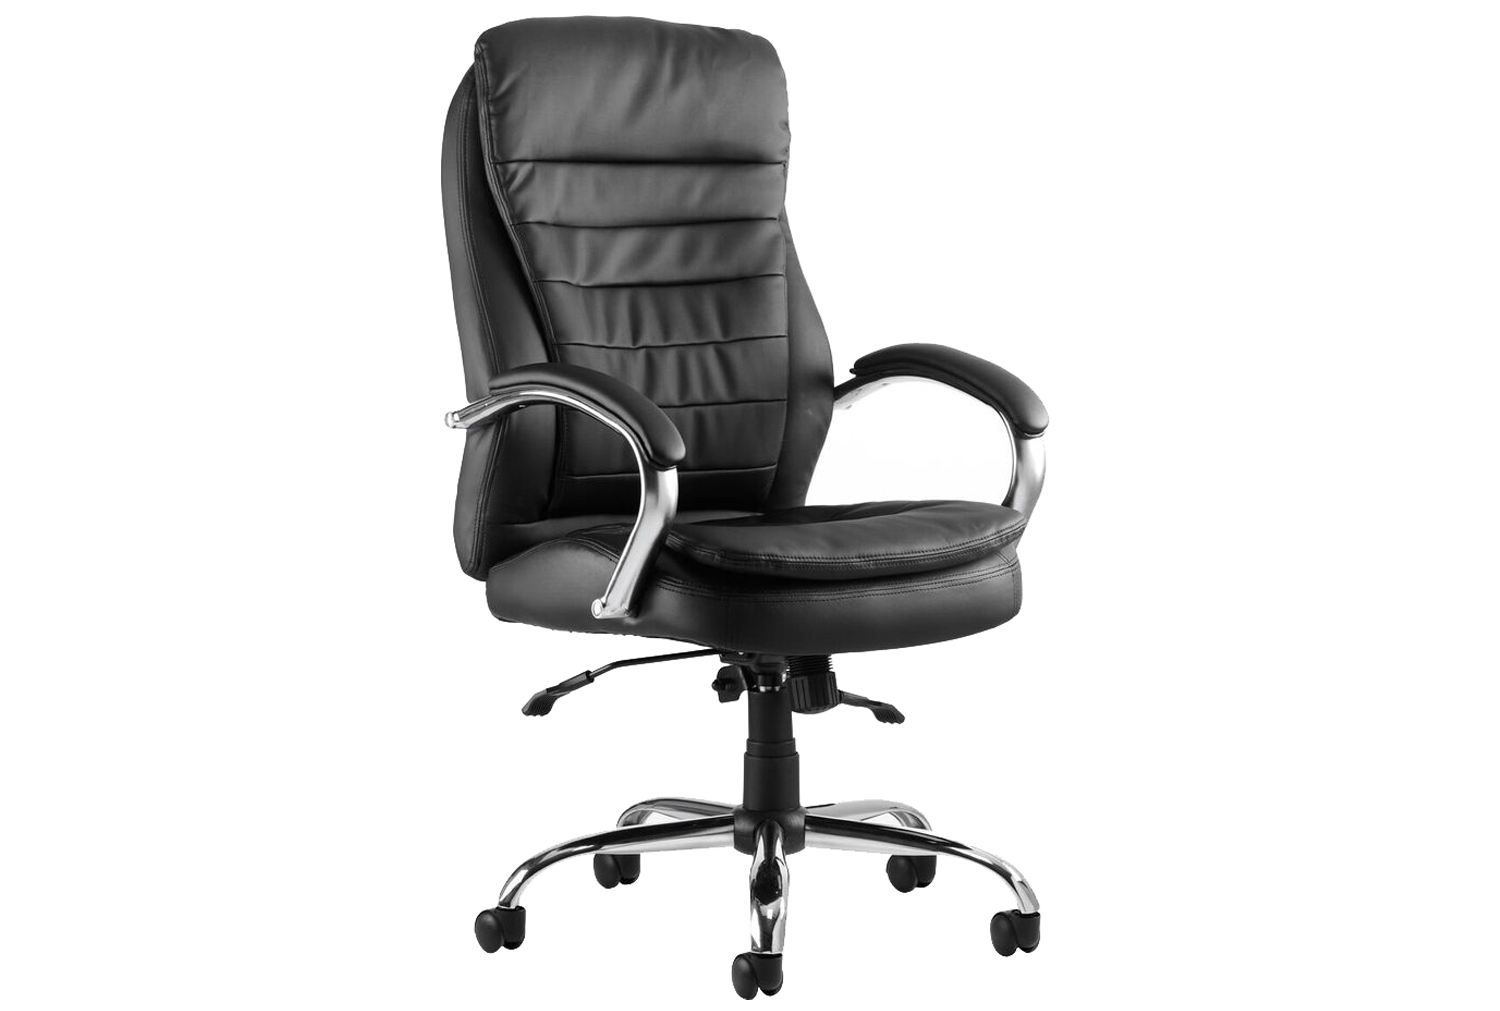 Babel High Back Leather Executive Office Chair Black, Black, Fully Installed